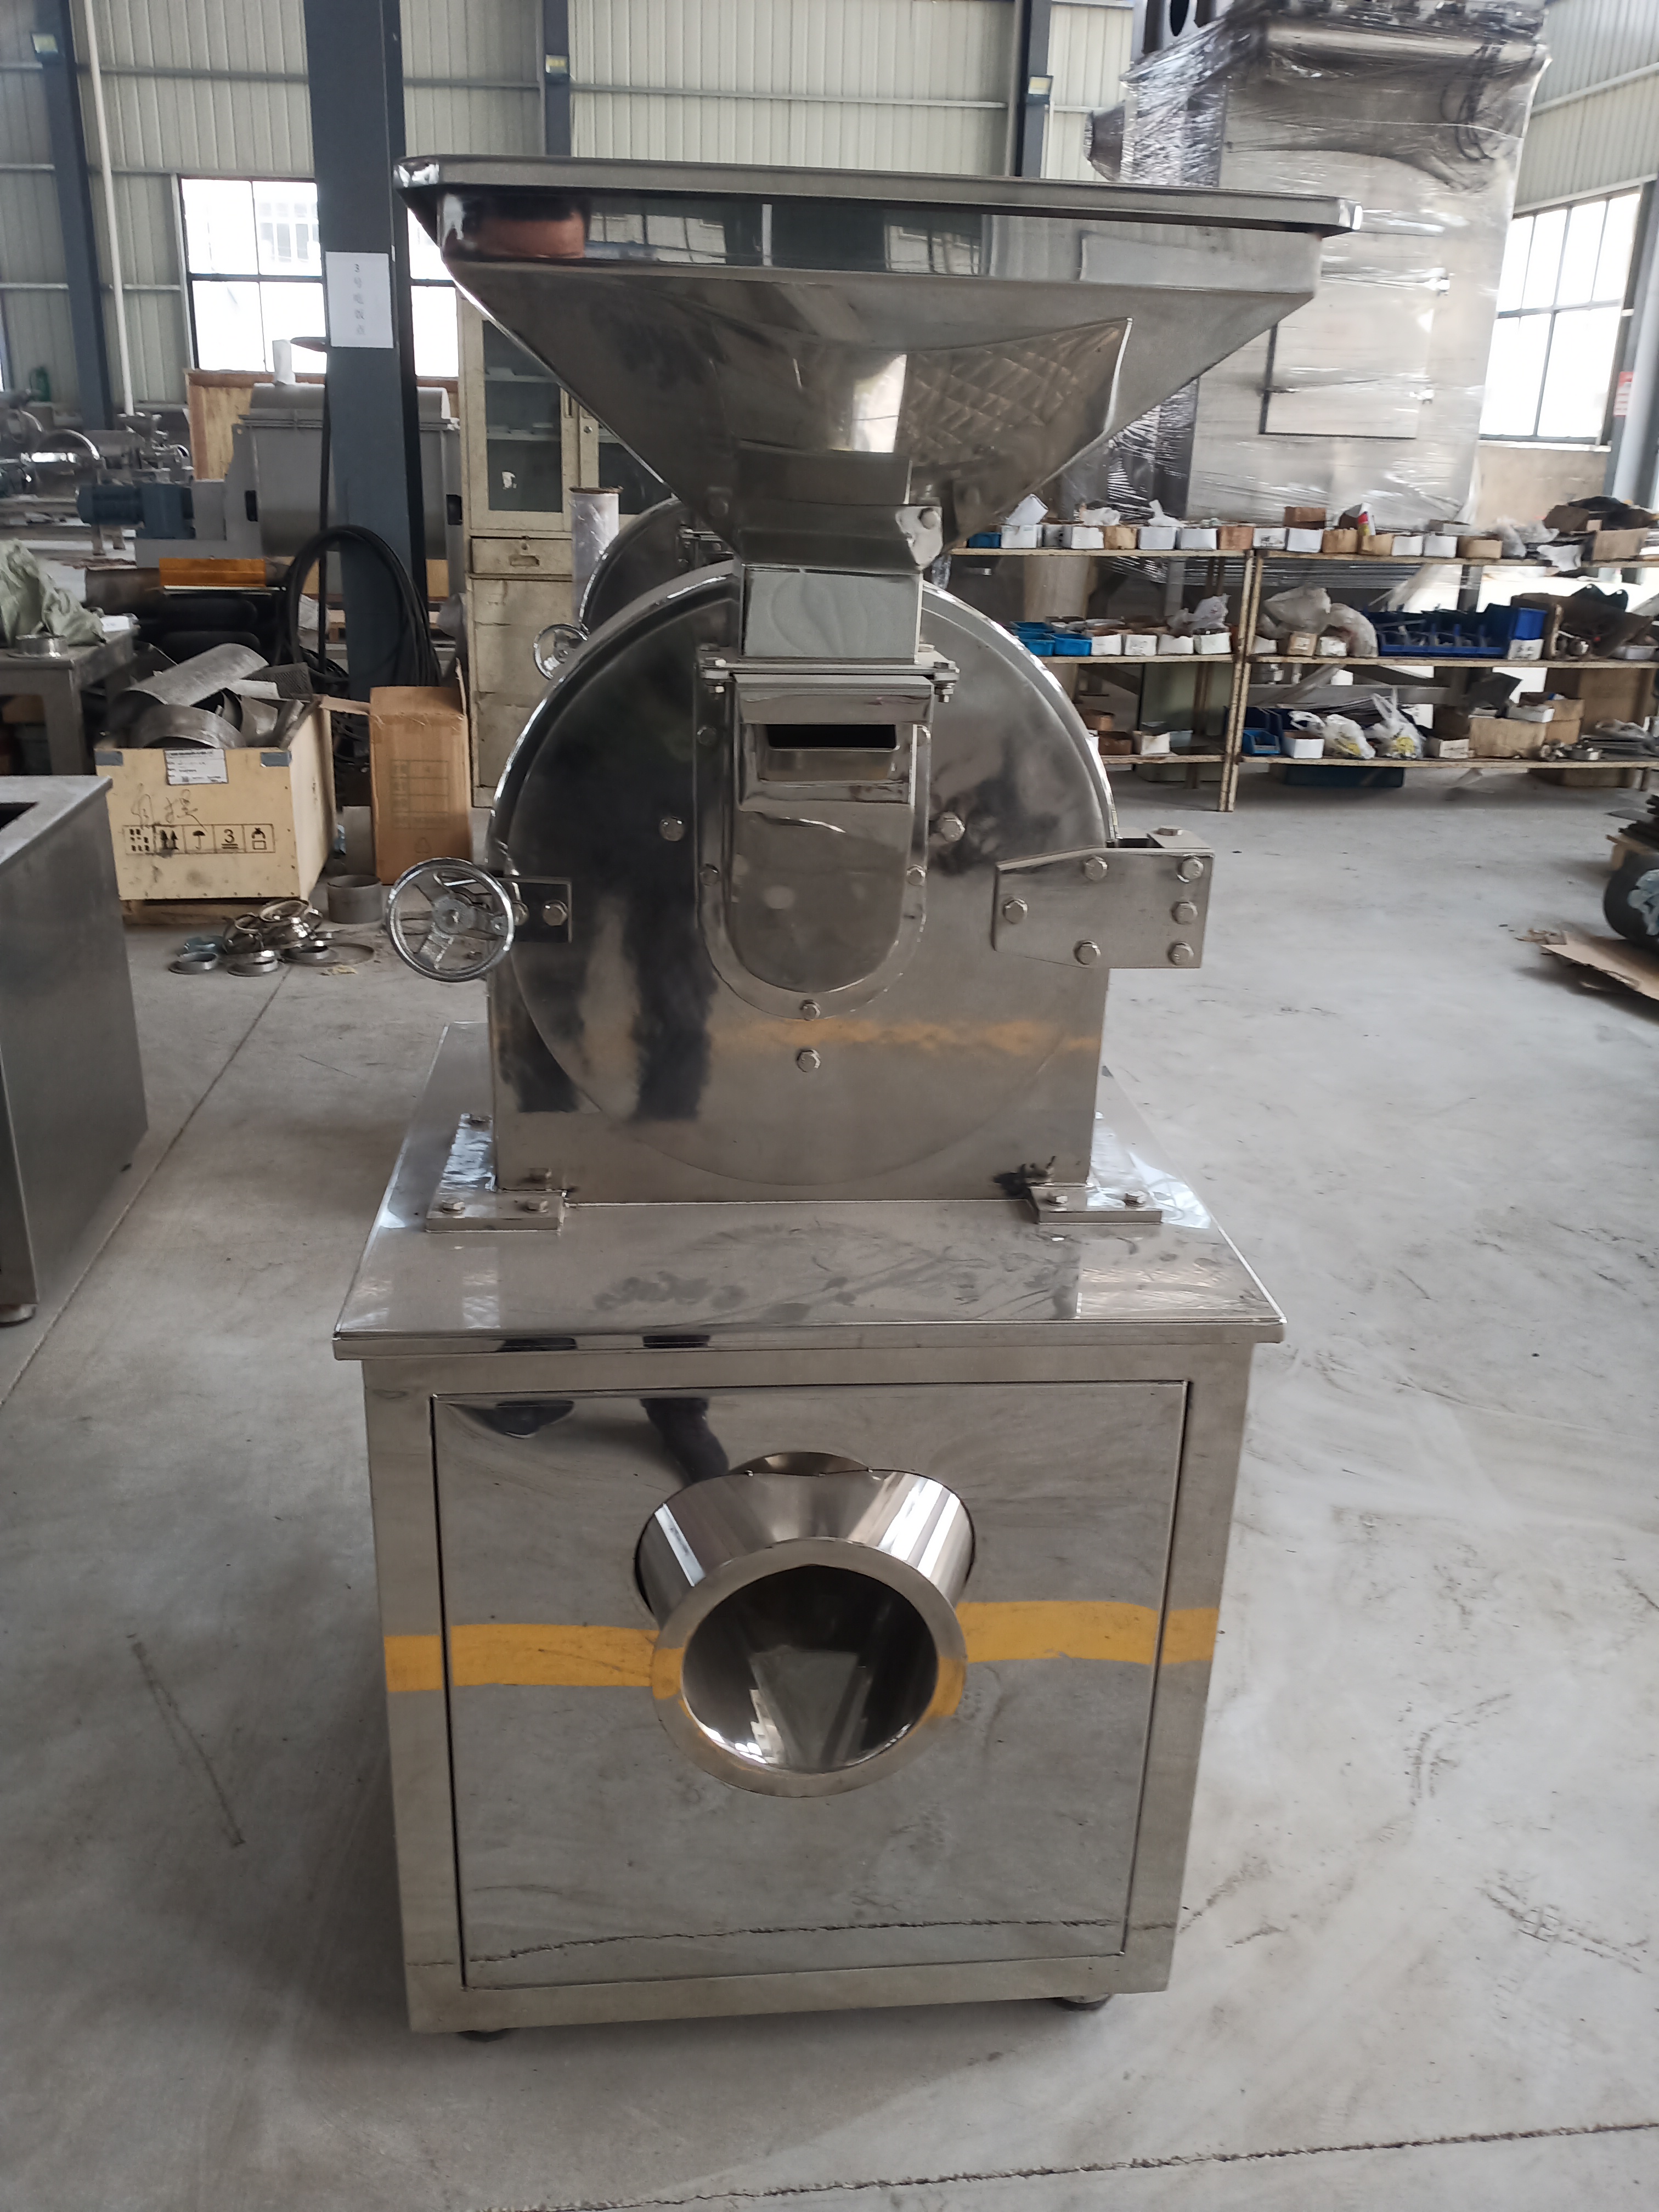 Dry rice grinder Soaked rice flour mill Toothed disc stainless steel mill Huiheng supply